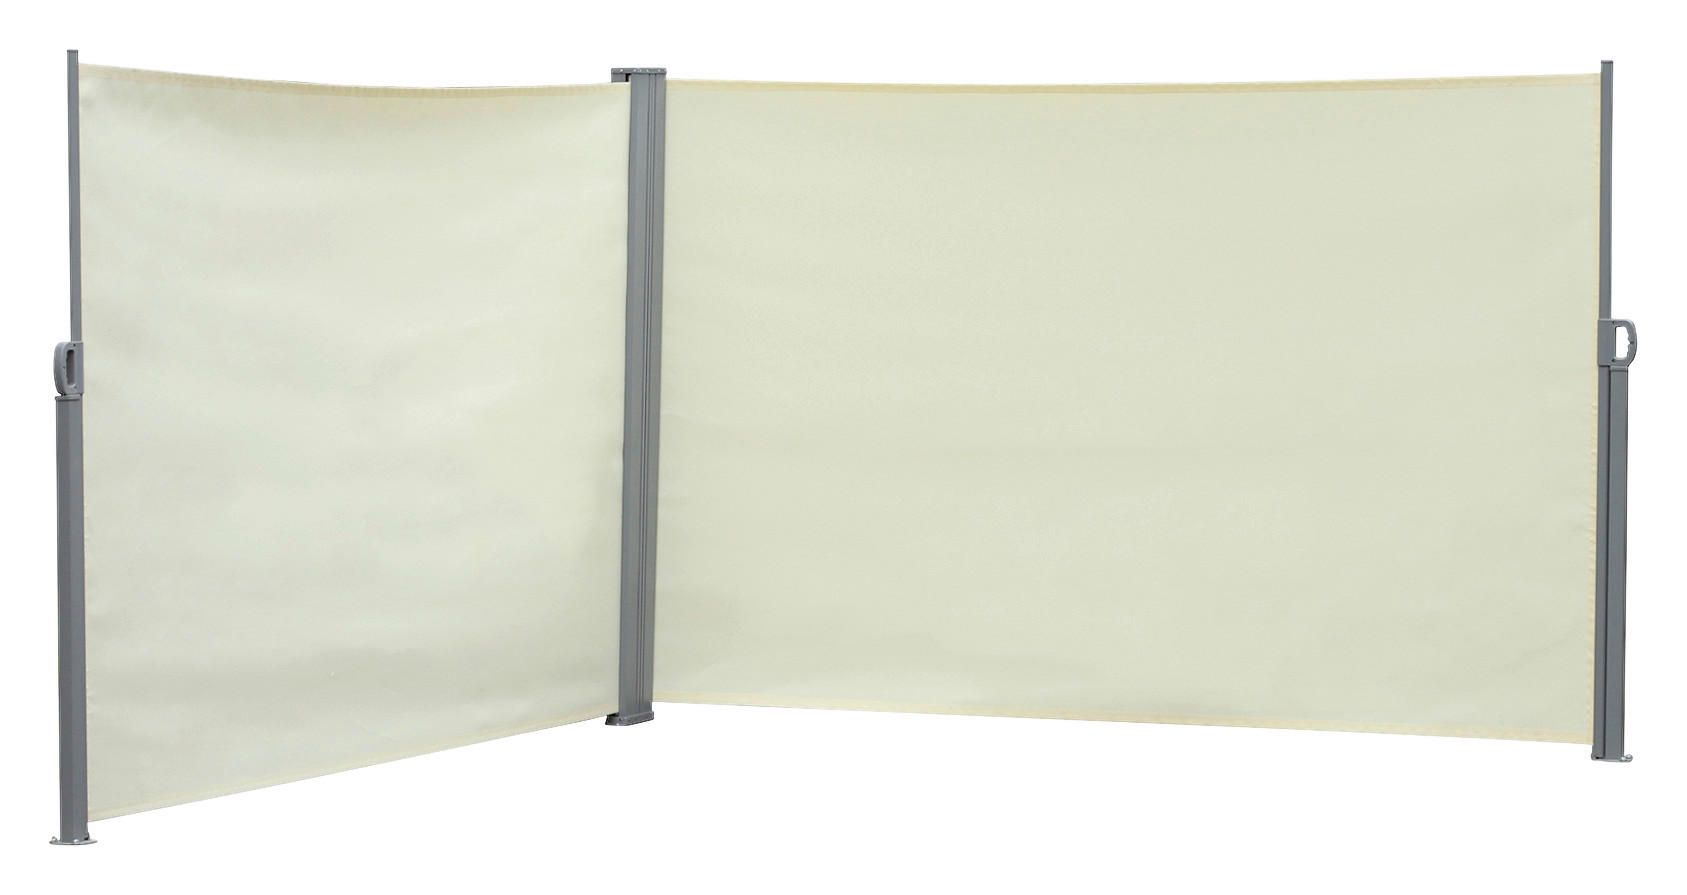 Outsunny Doppel-Seitenmarkise creme Metall H/L: ca. 80x600 cm Doppel-Seitenmarkise - weiß/creme (600,00cm)